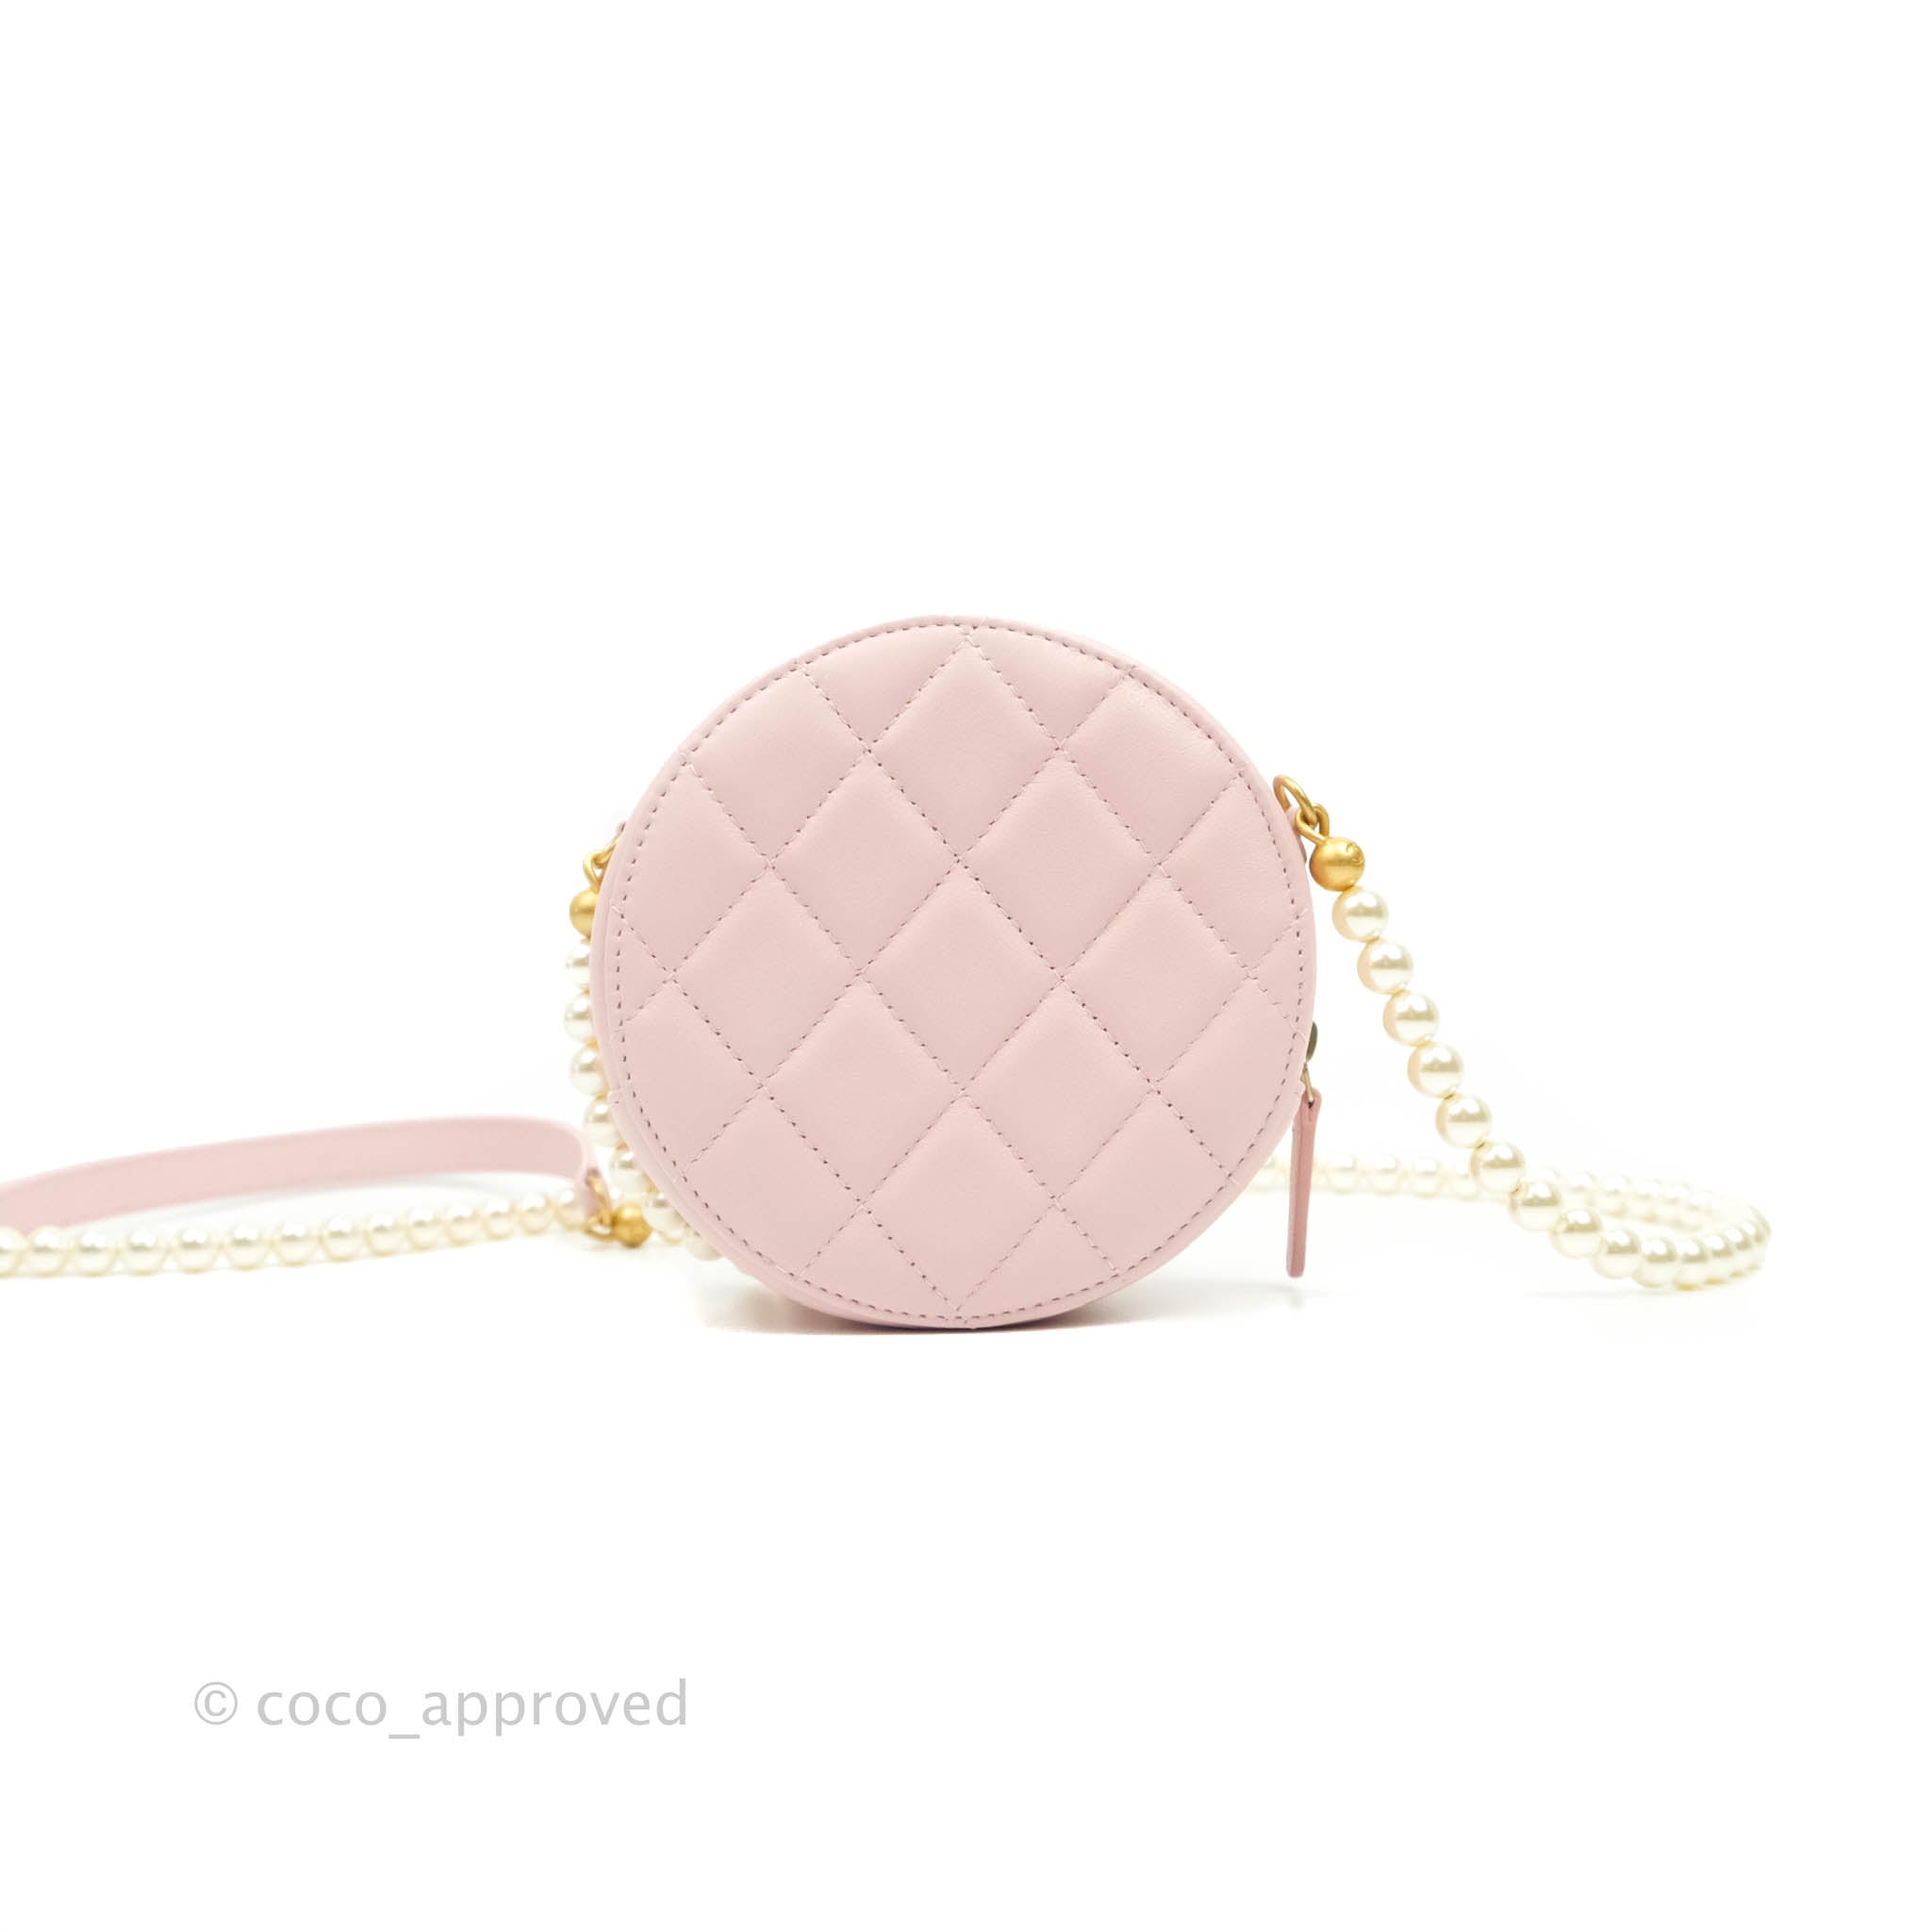 chanel round purse with chain